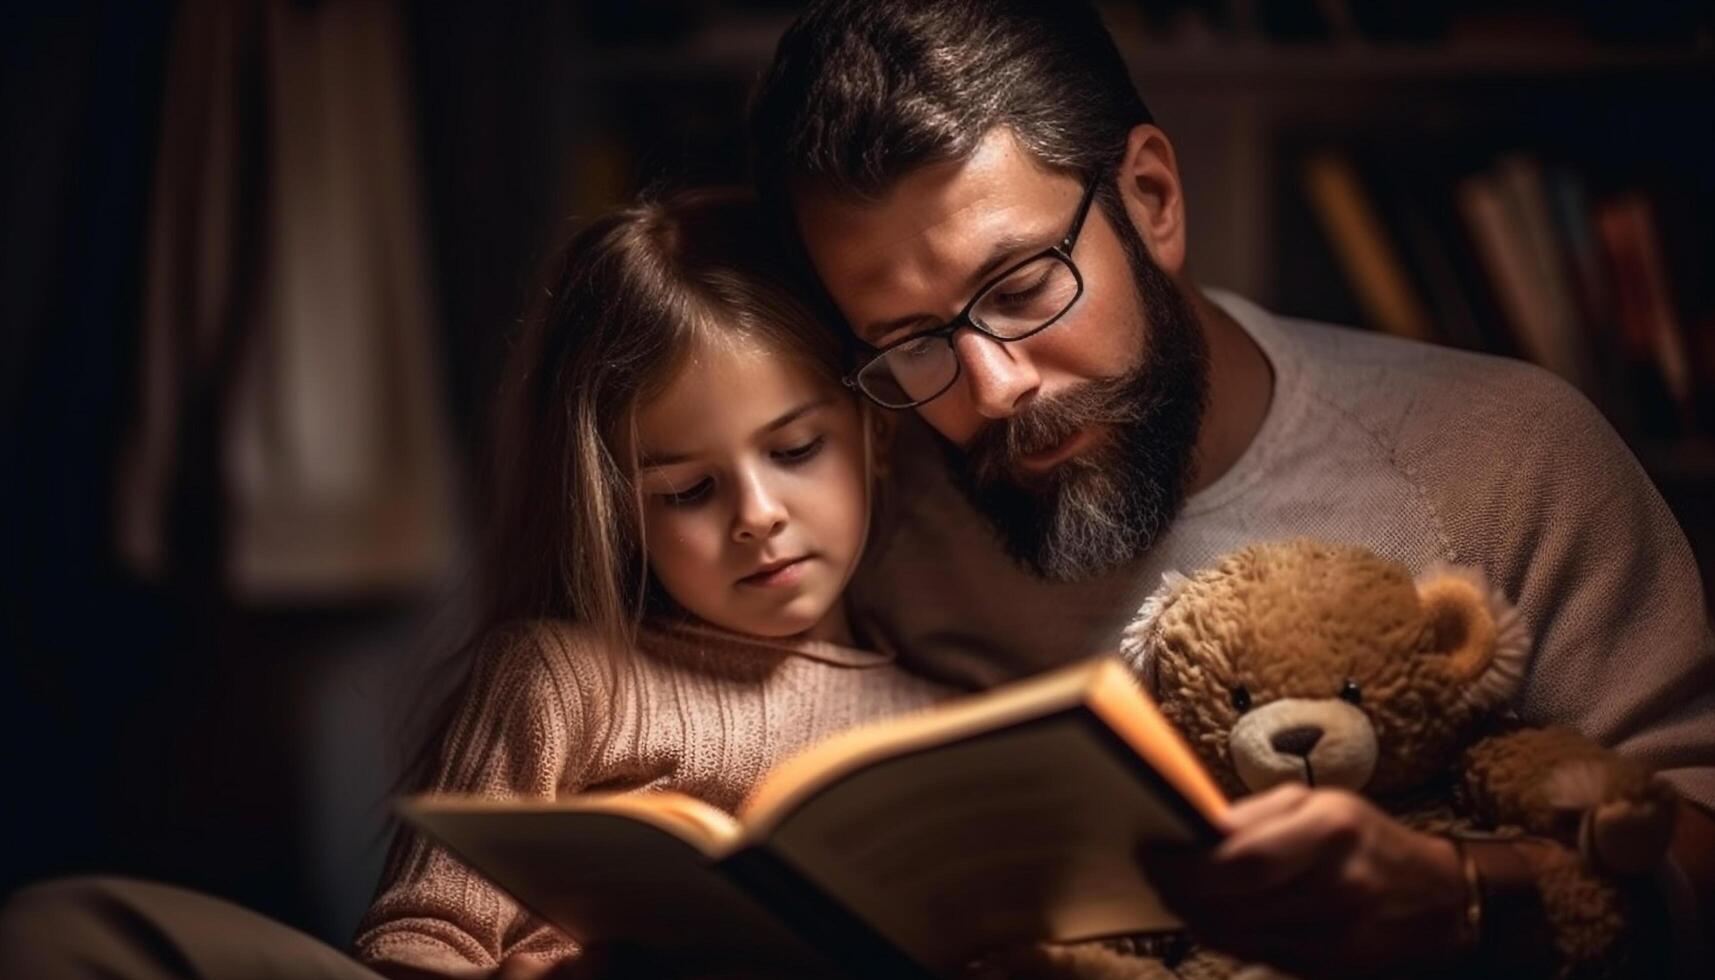 Father and son bonding over bedtime story generated by AI photo